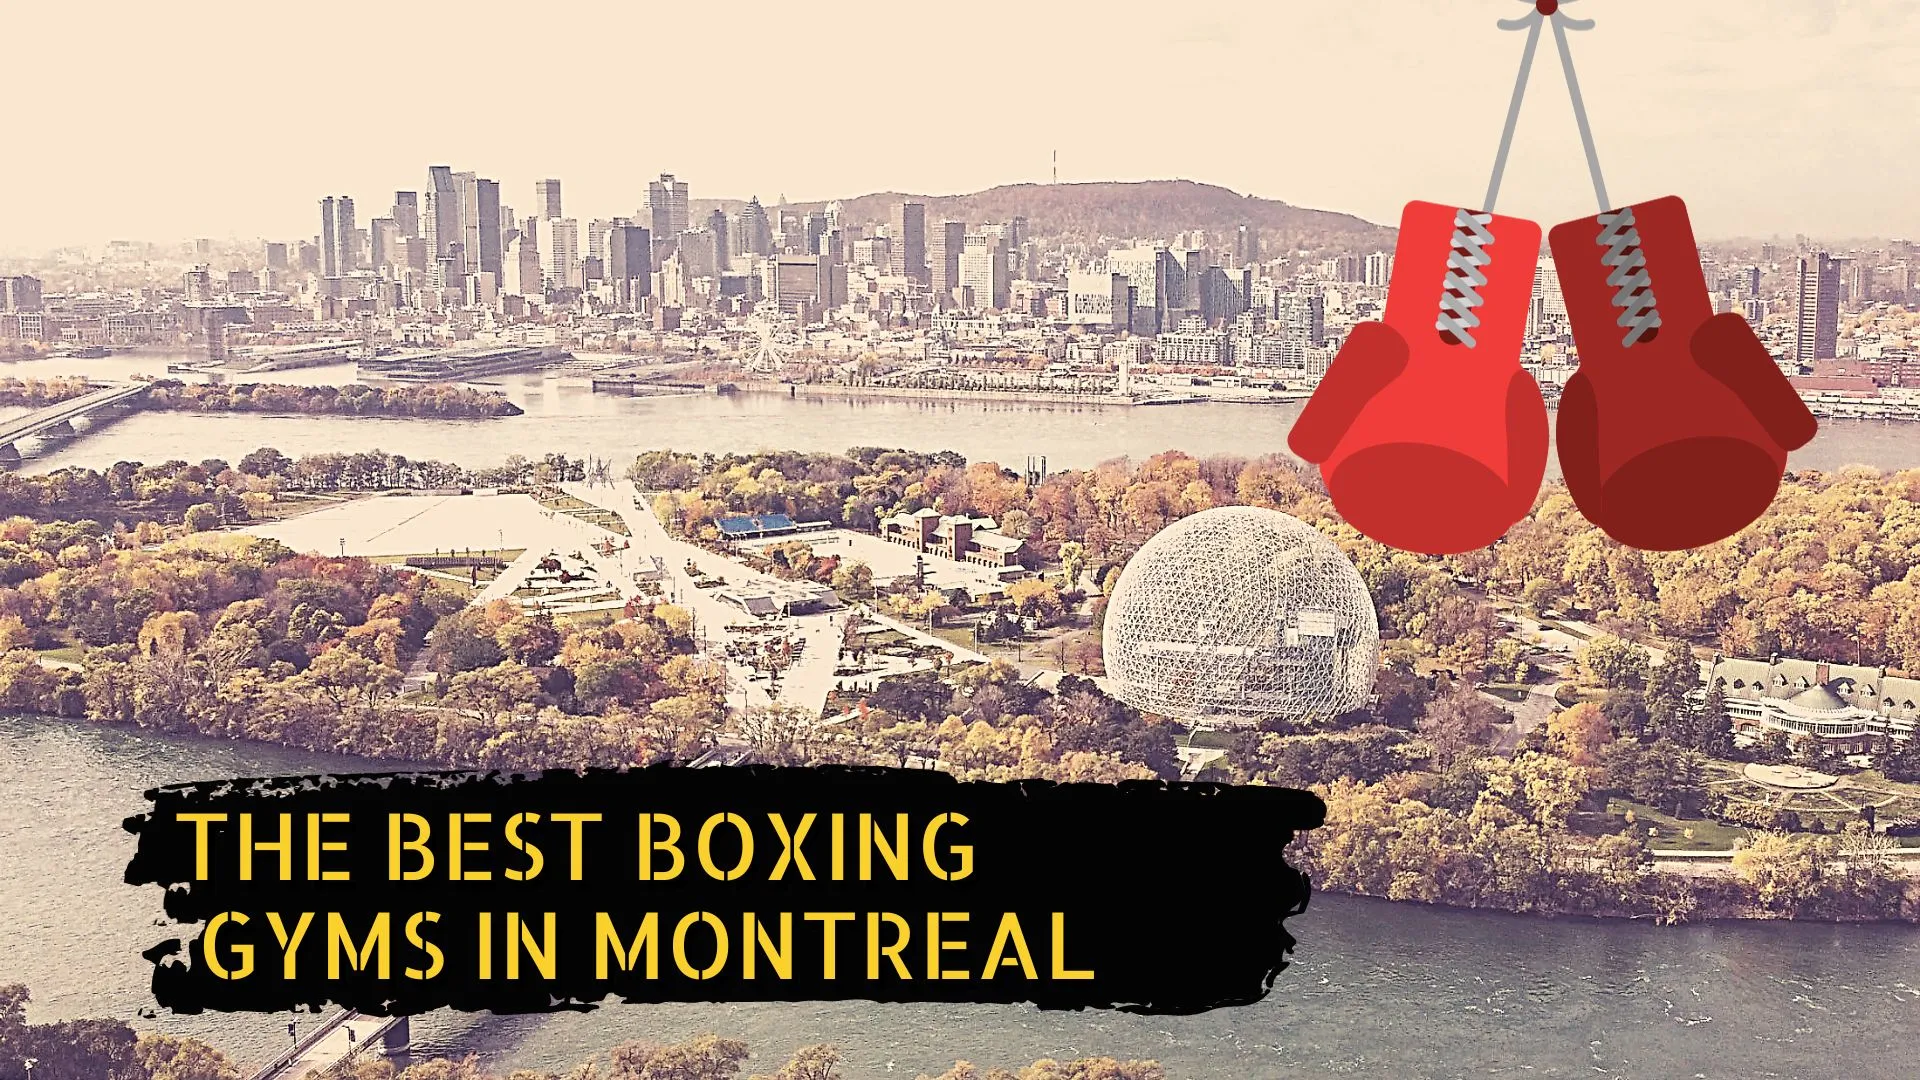 Montreal skyline and the title the best boxing gyms in Montreal